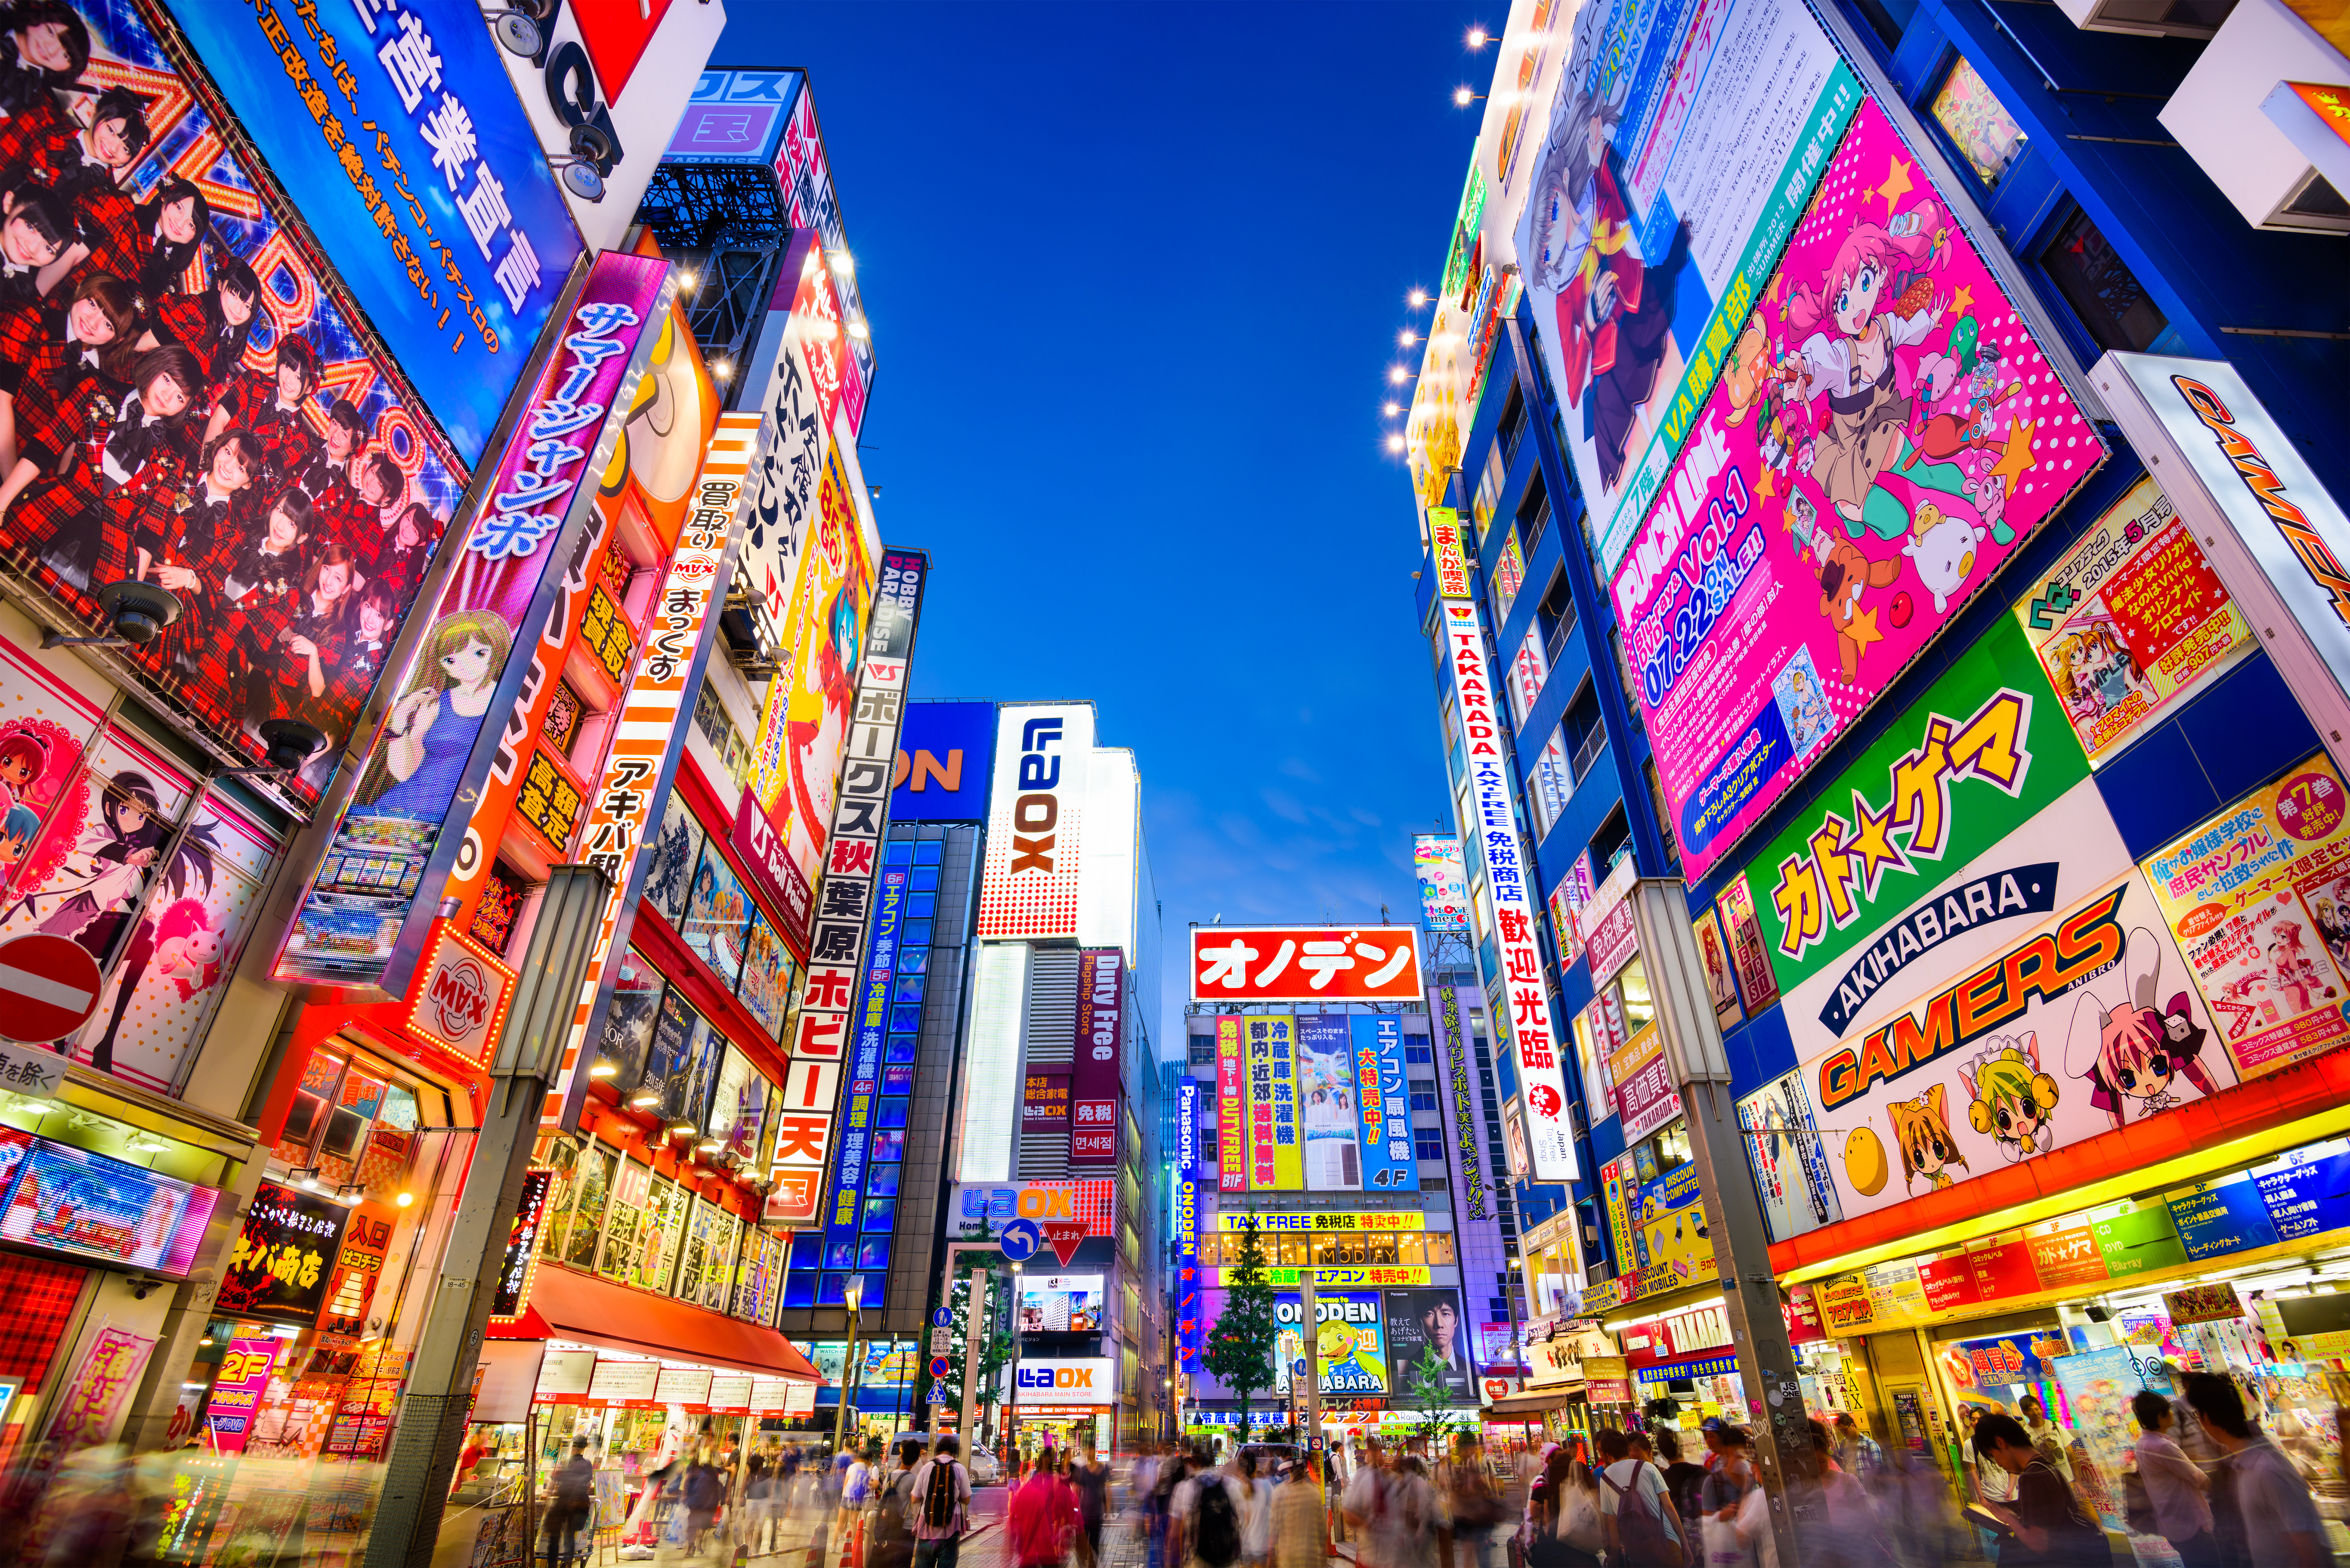 Tokyo is famous for its neon lights